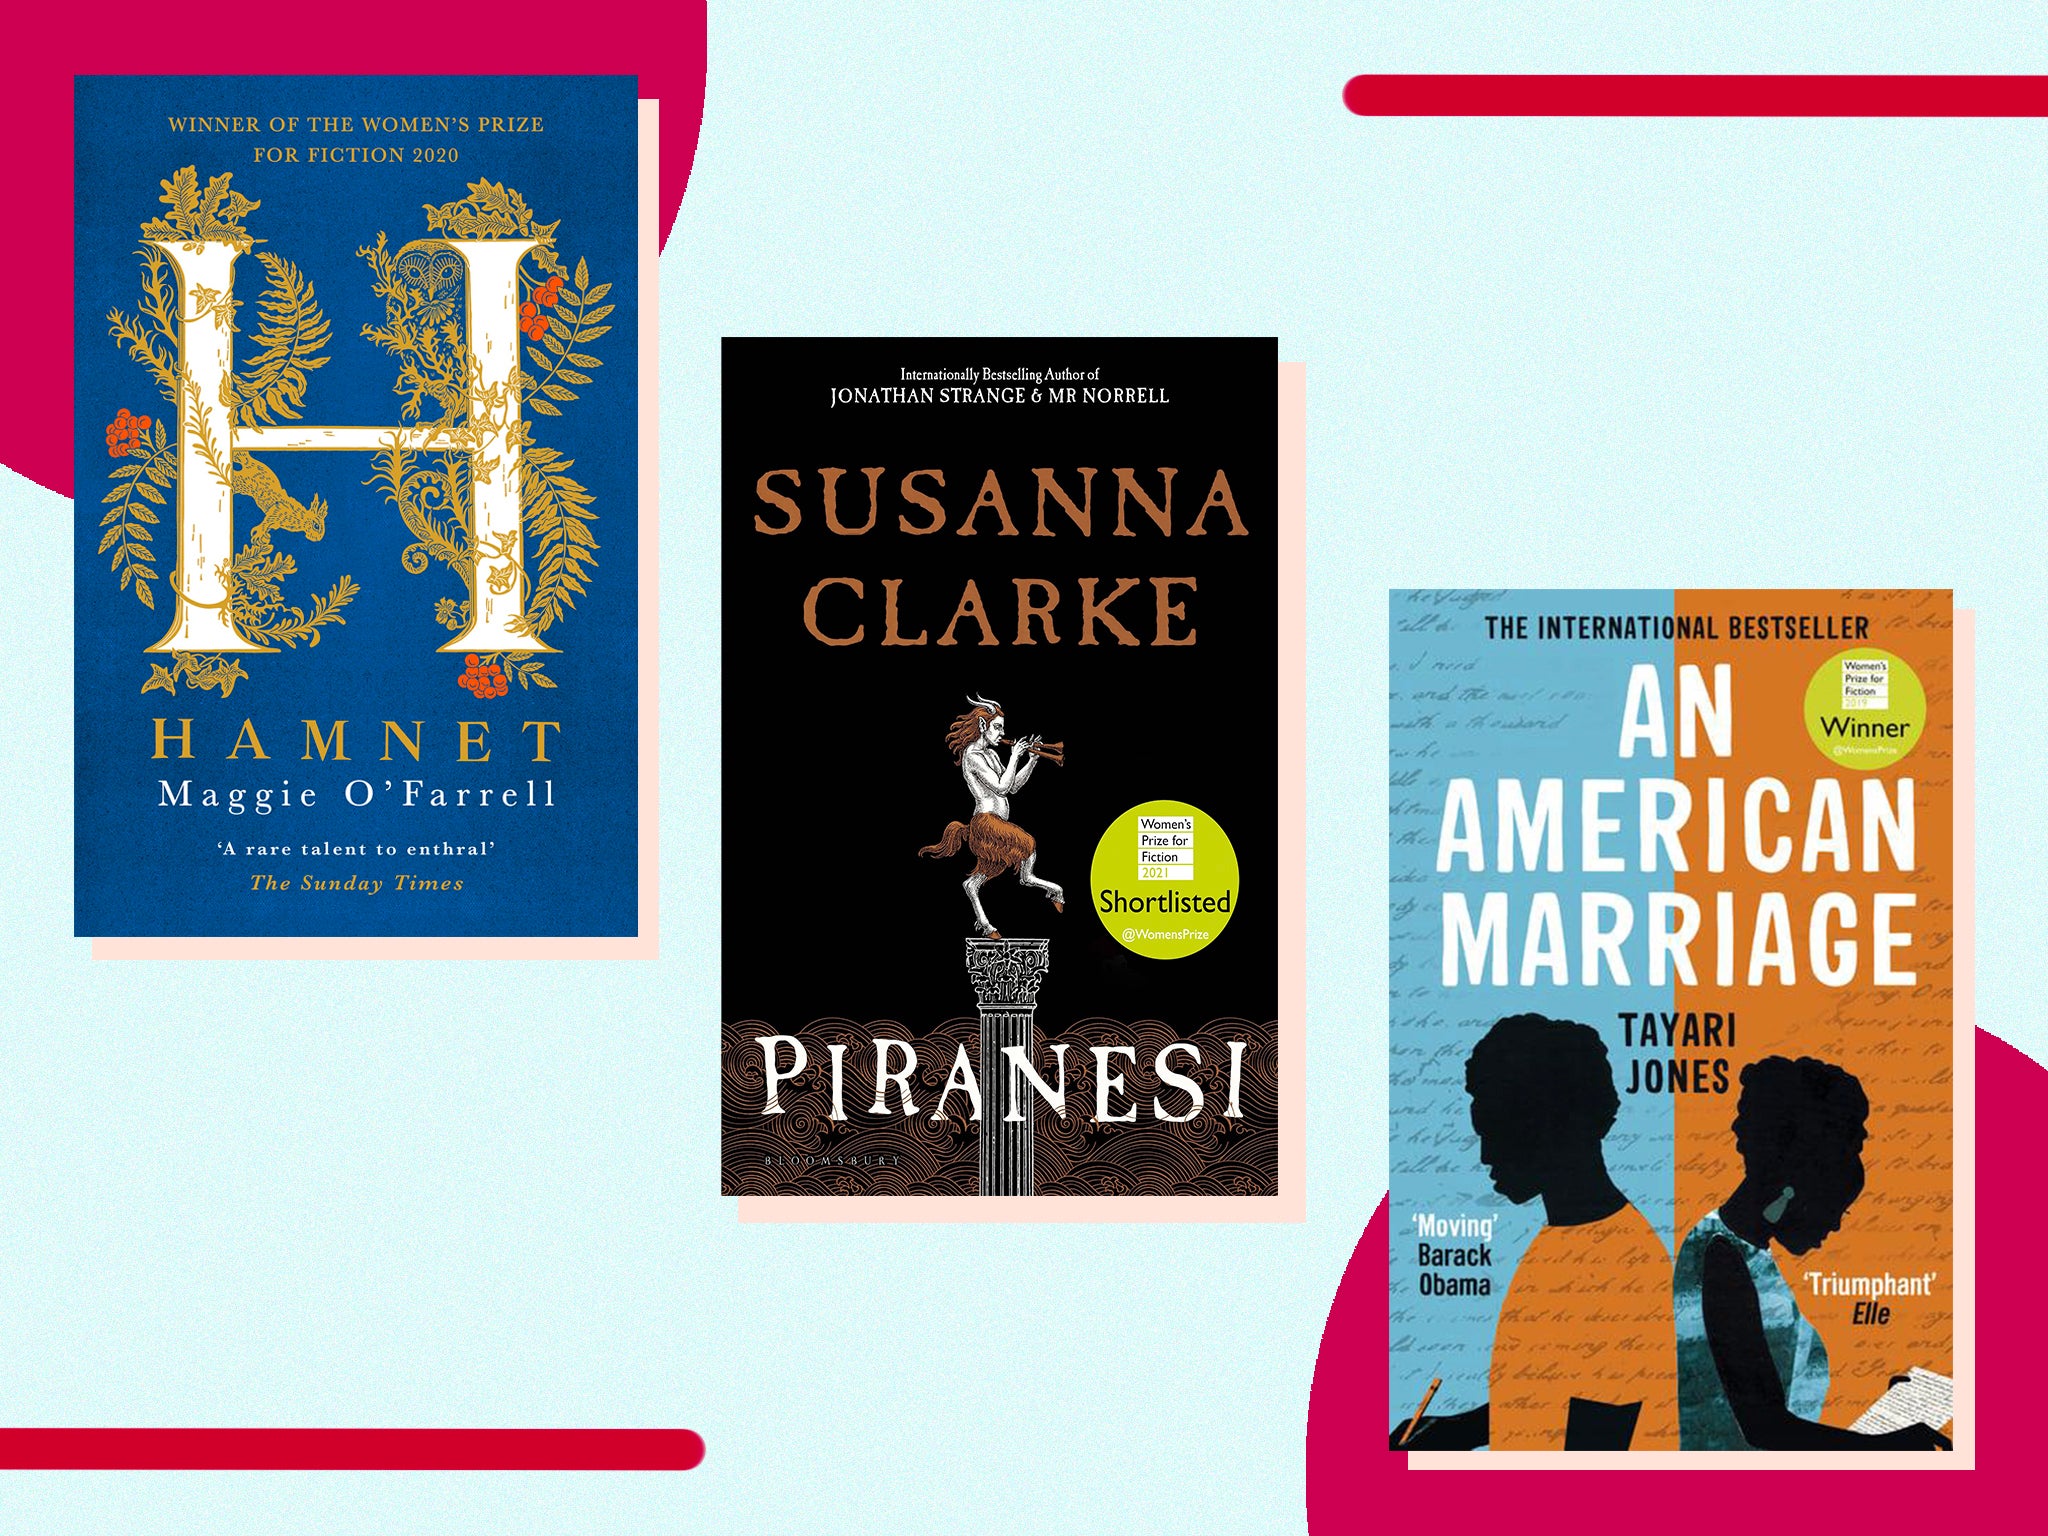 Join us in celebrating women writers from across the globe by reading these truly remarkable books